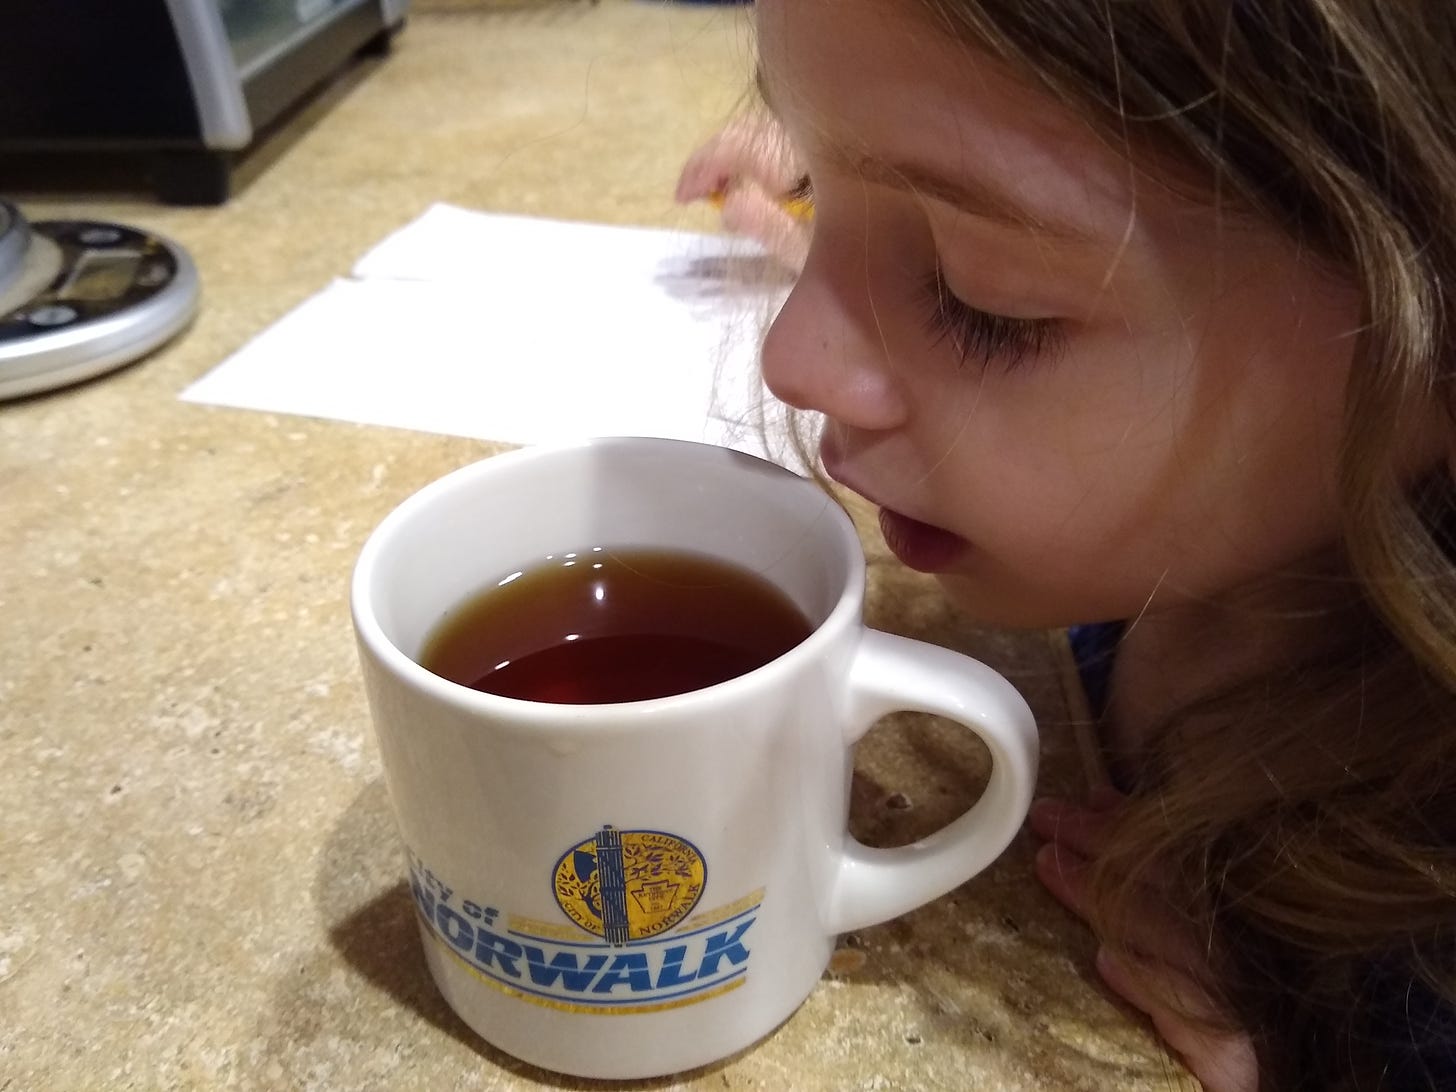 A child's face hovering over a hot beverage